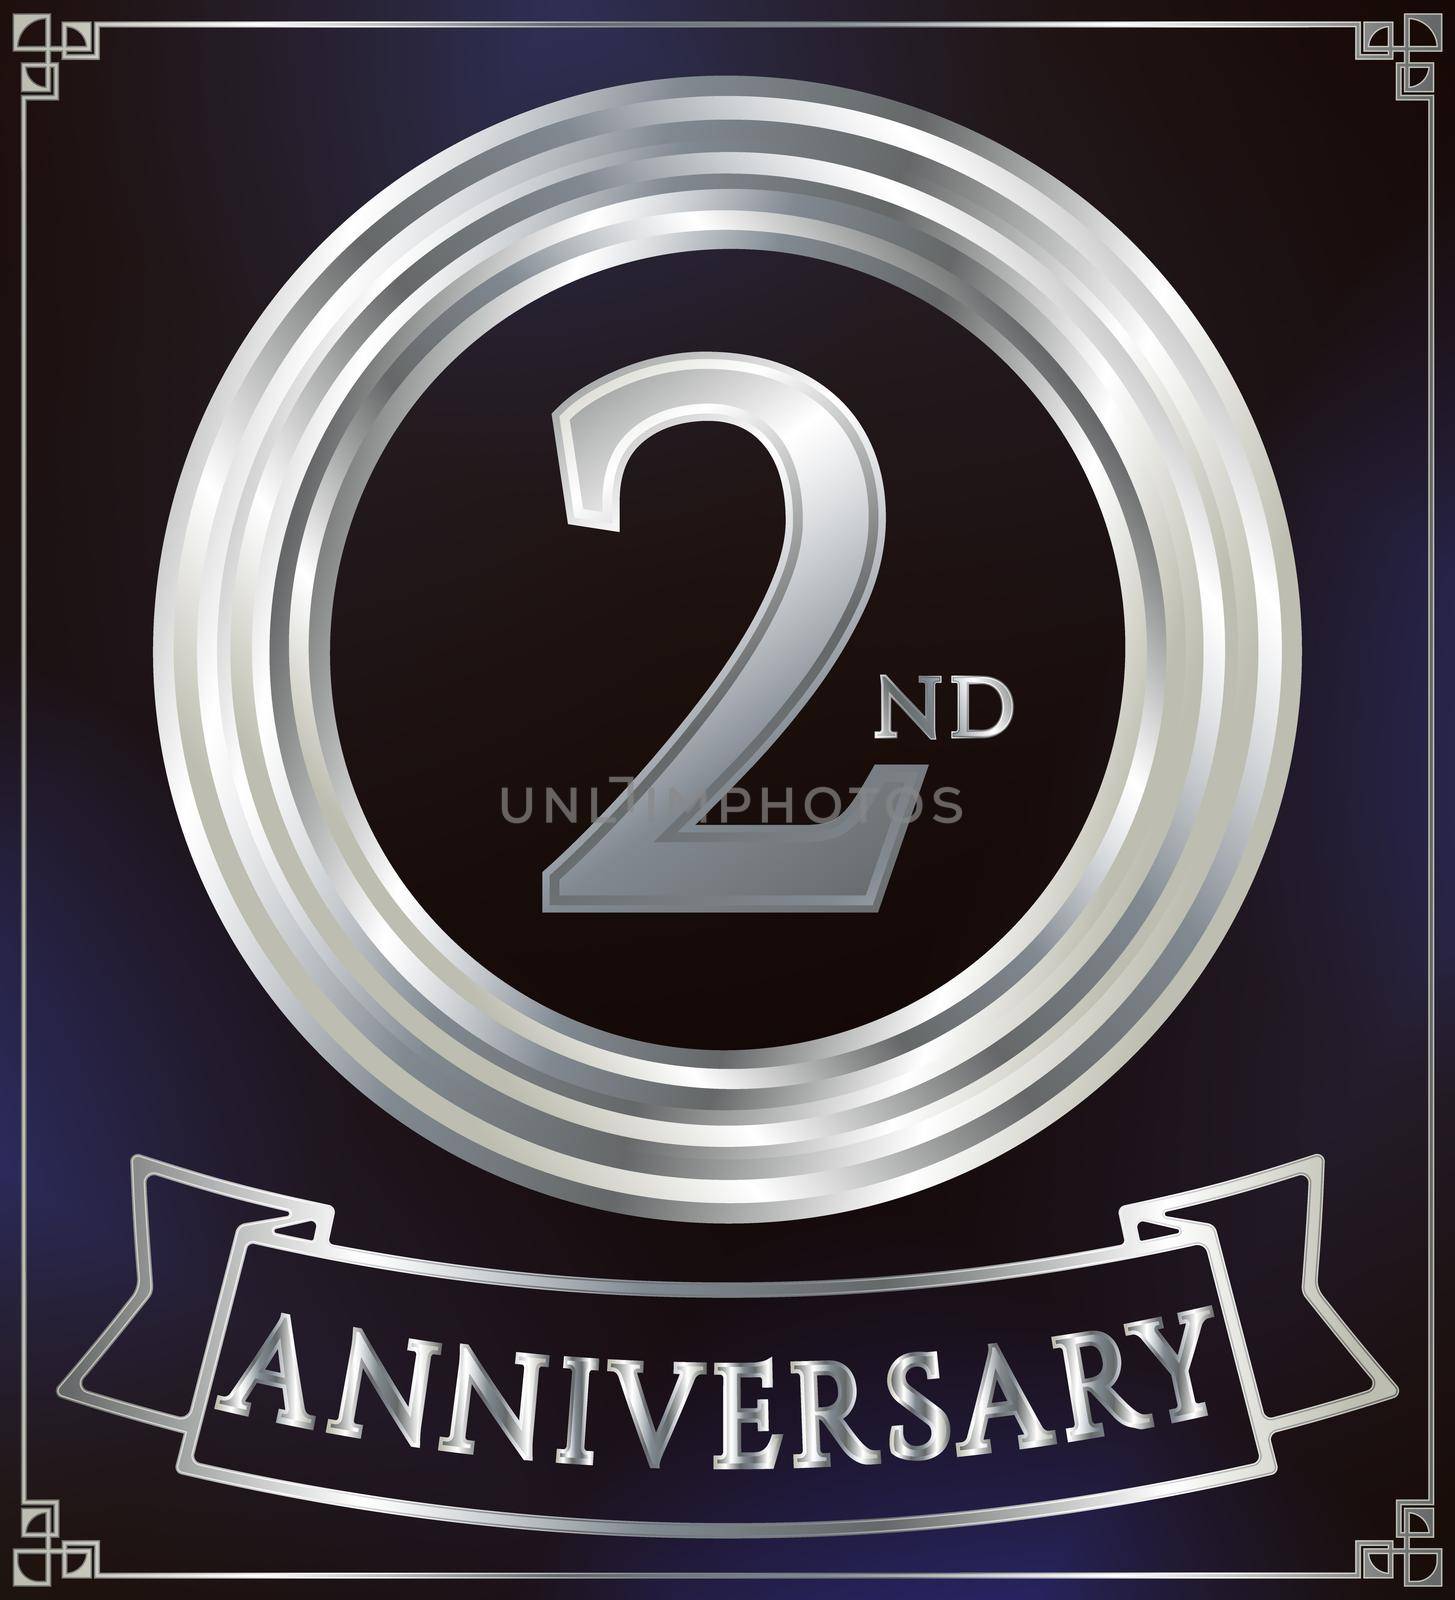 Anniversary silver ring logo number 2. Anniversary card with ribbon. Blue background. Vector illustration.